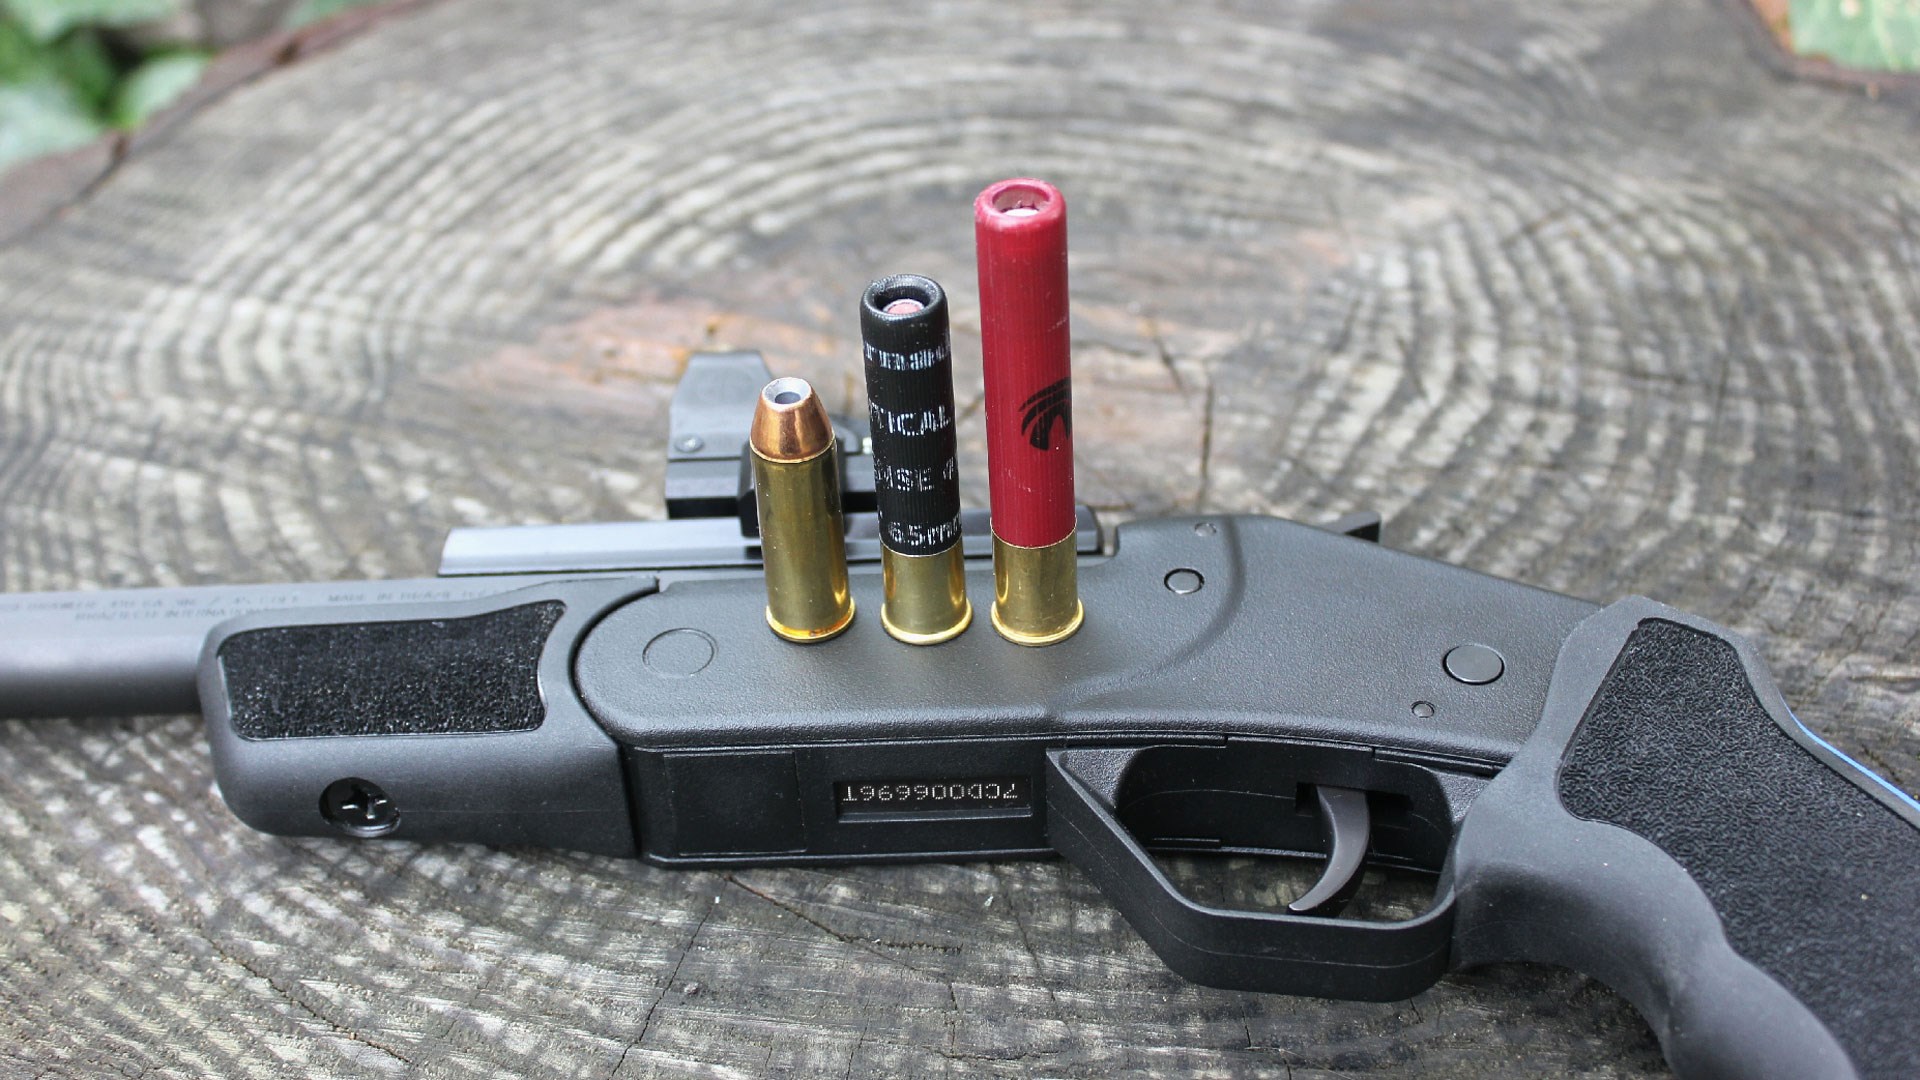 Rossi Brawler with ammo stacked on top